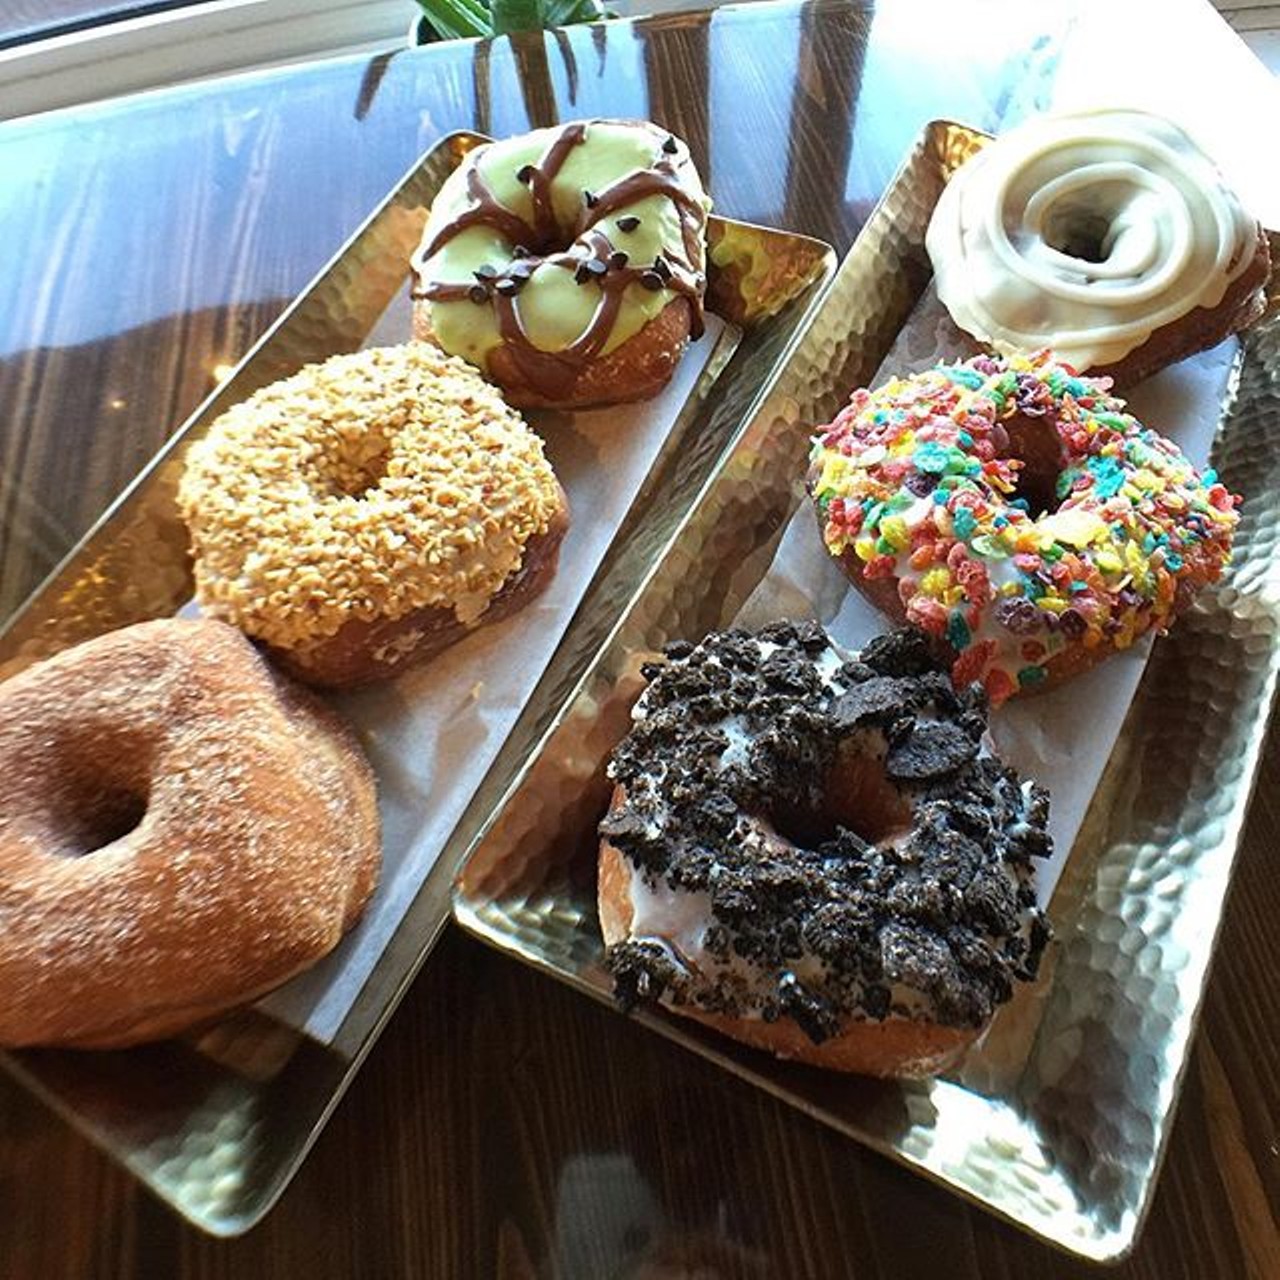 Doughnuts from Valhalla
2603 E. South St.
These vegan doughnuts taste as good as they look with the right amount of sweetness and flavor combos ranging from sophisticated (lavender and honey) to crazy (Fruity Pebbz).
Photo via valhallabakery/Instagram